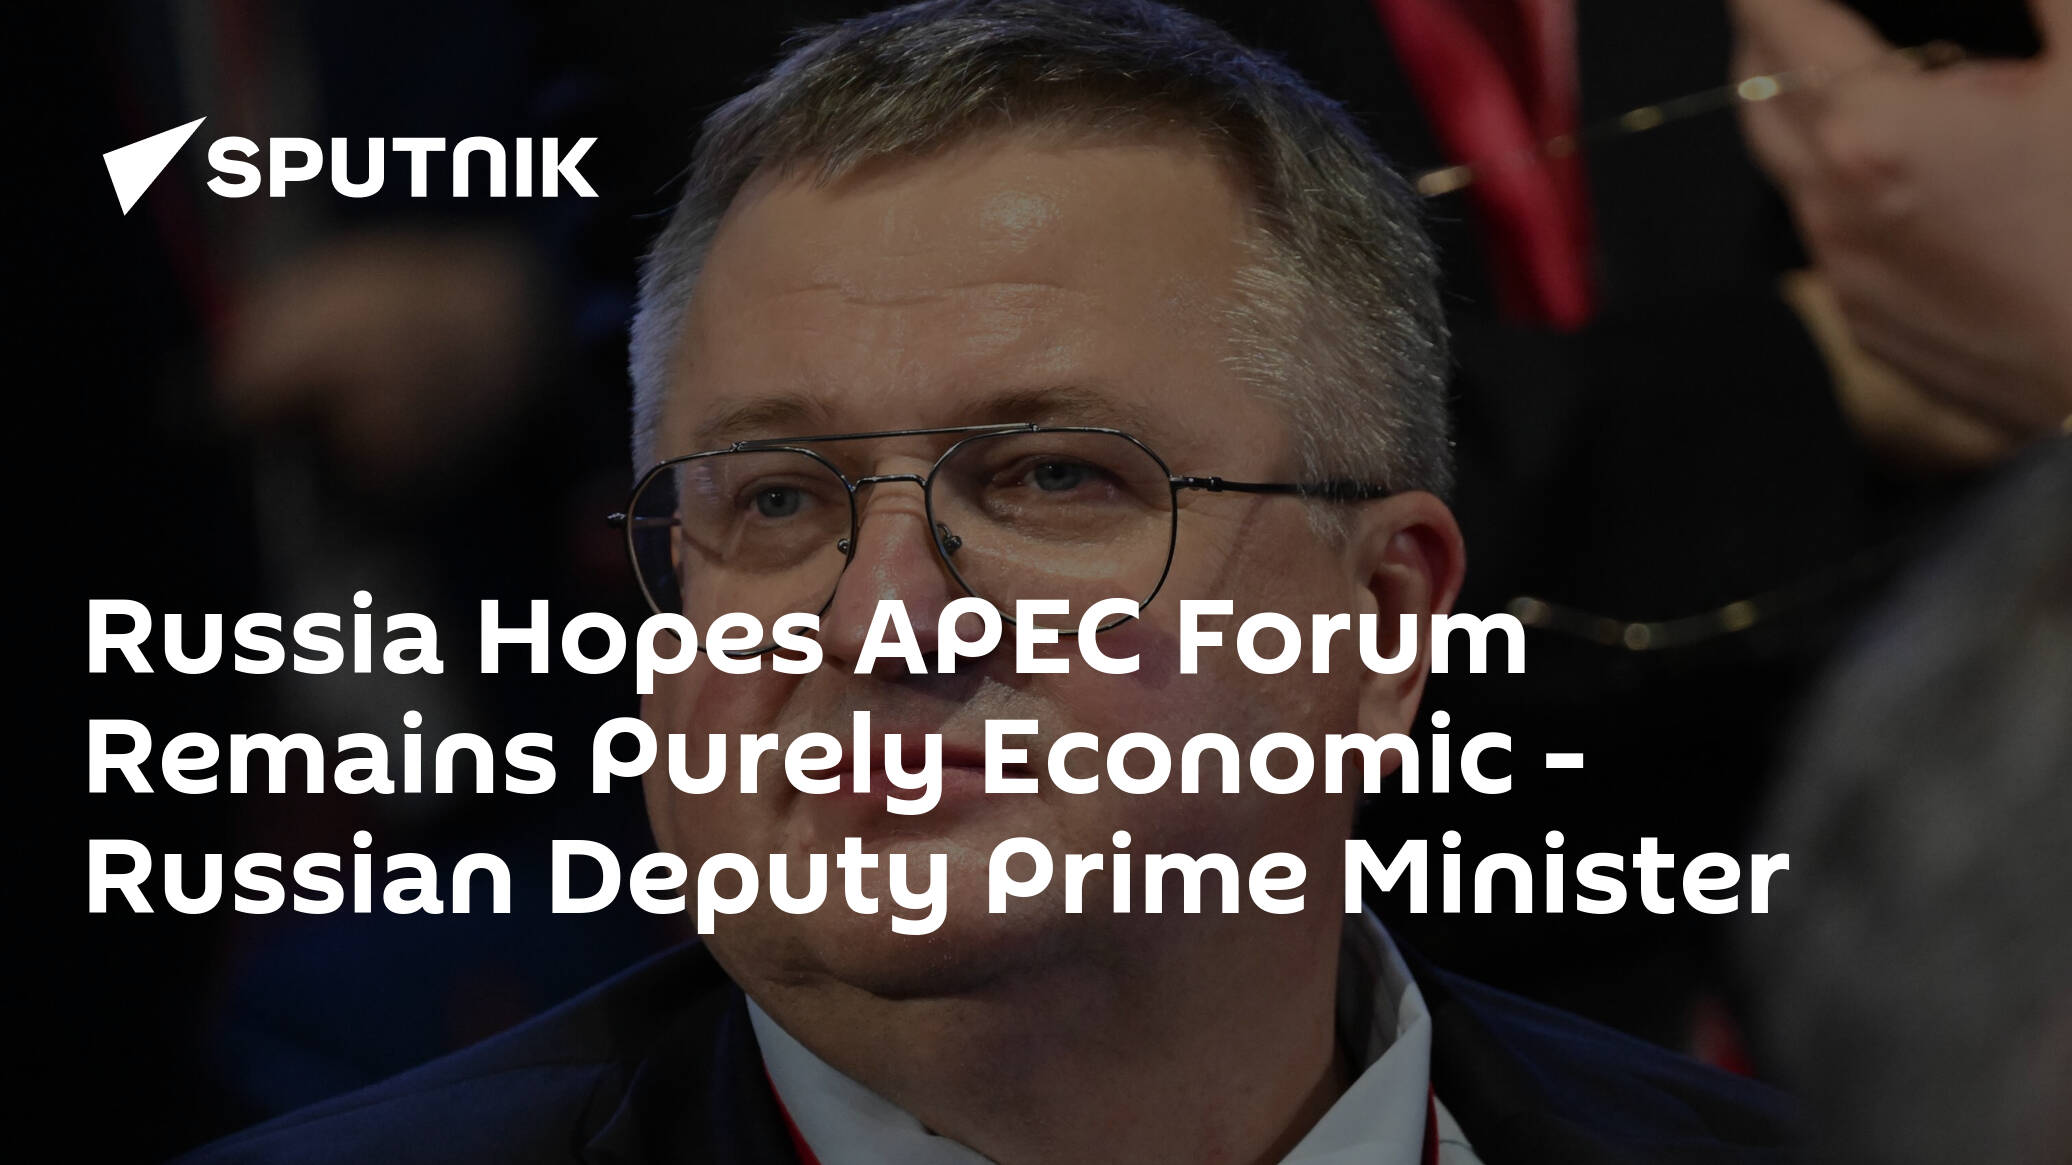 Russia Hopes APEC to Remain Purely Economic Forum – Russian Deputy Prime Minister